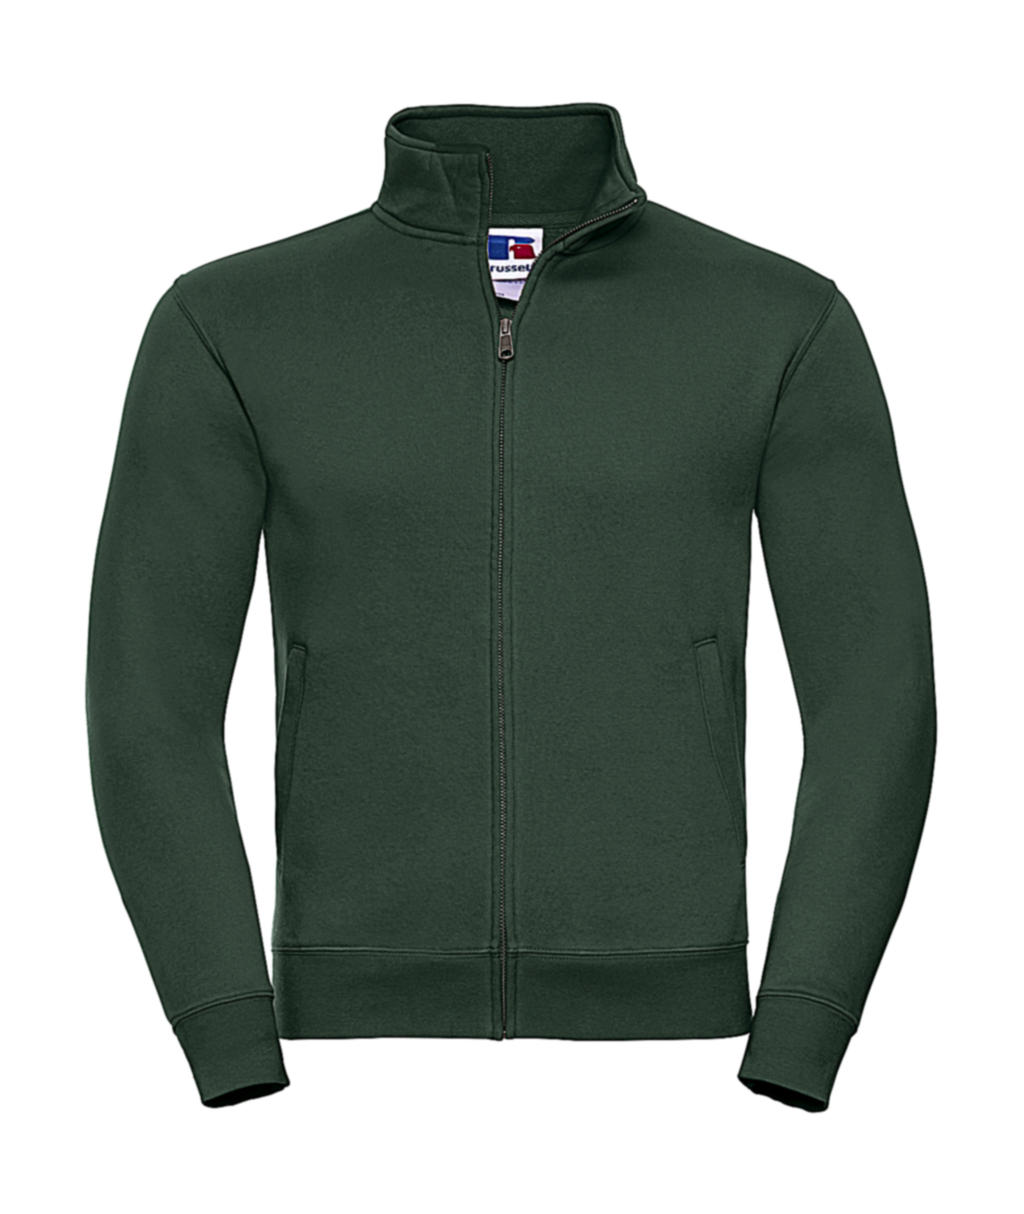  Mens Authentic Sweat Jacket in Farbe Bottle Green